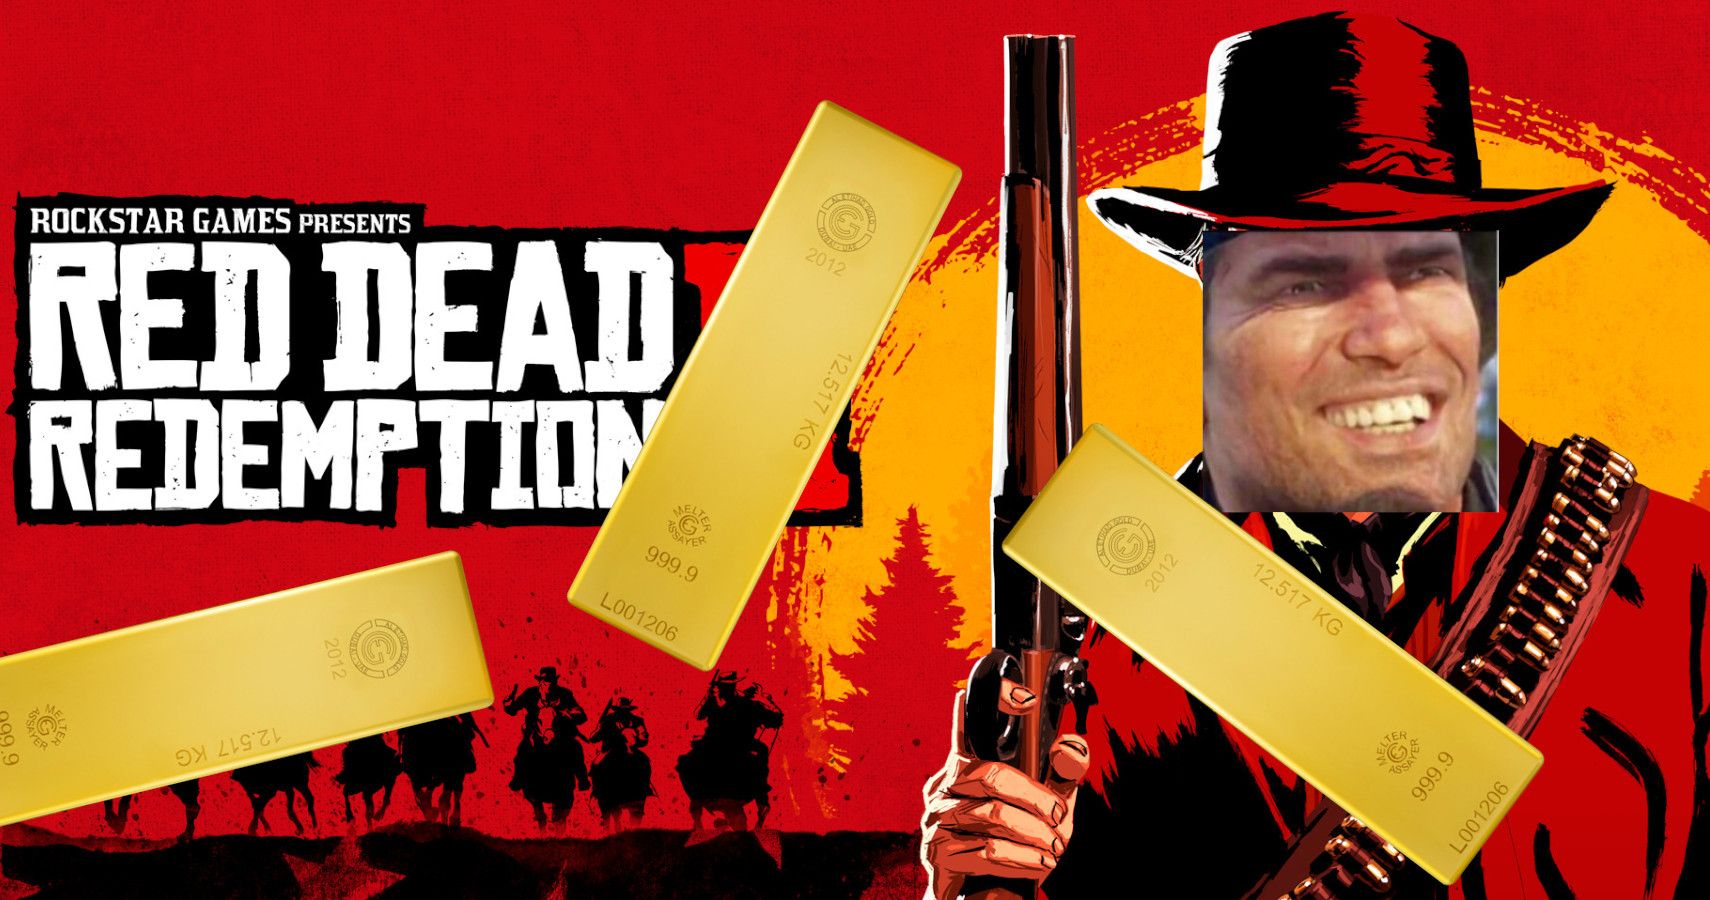 arthur from red dead photoshopped onto the game's art with gold bars around him